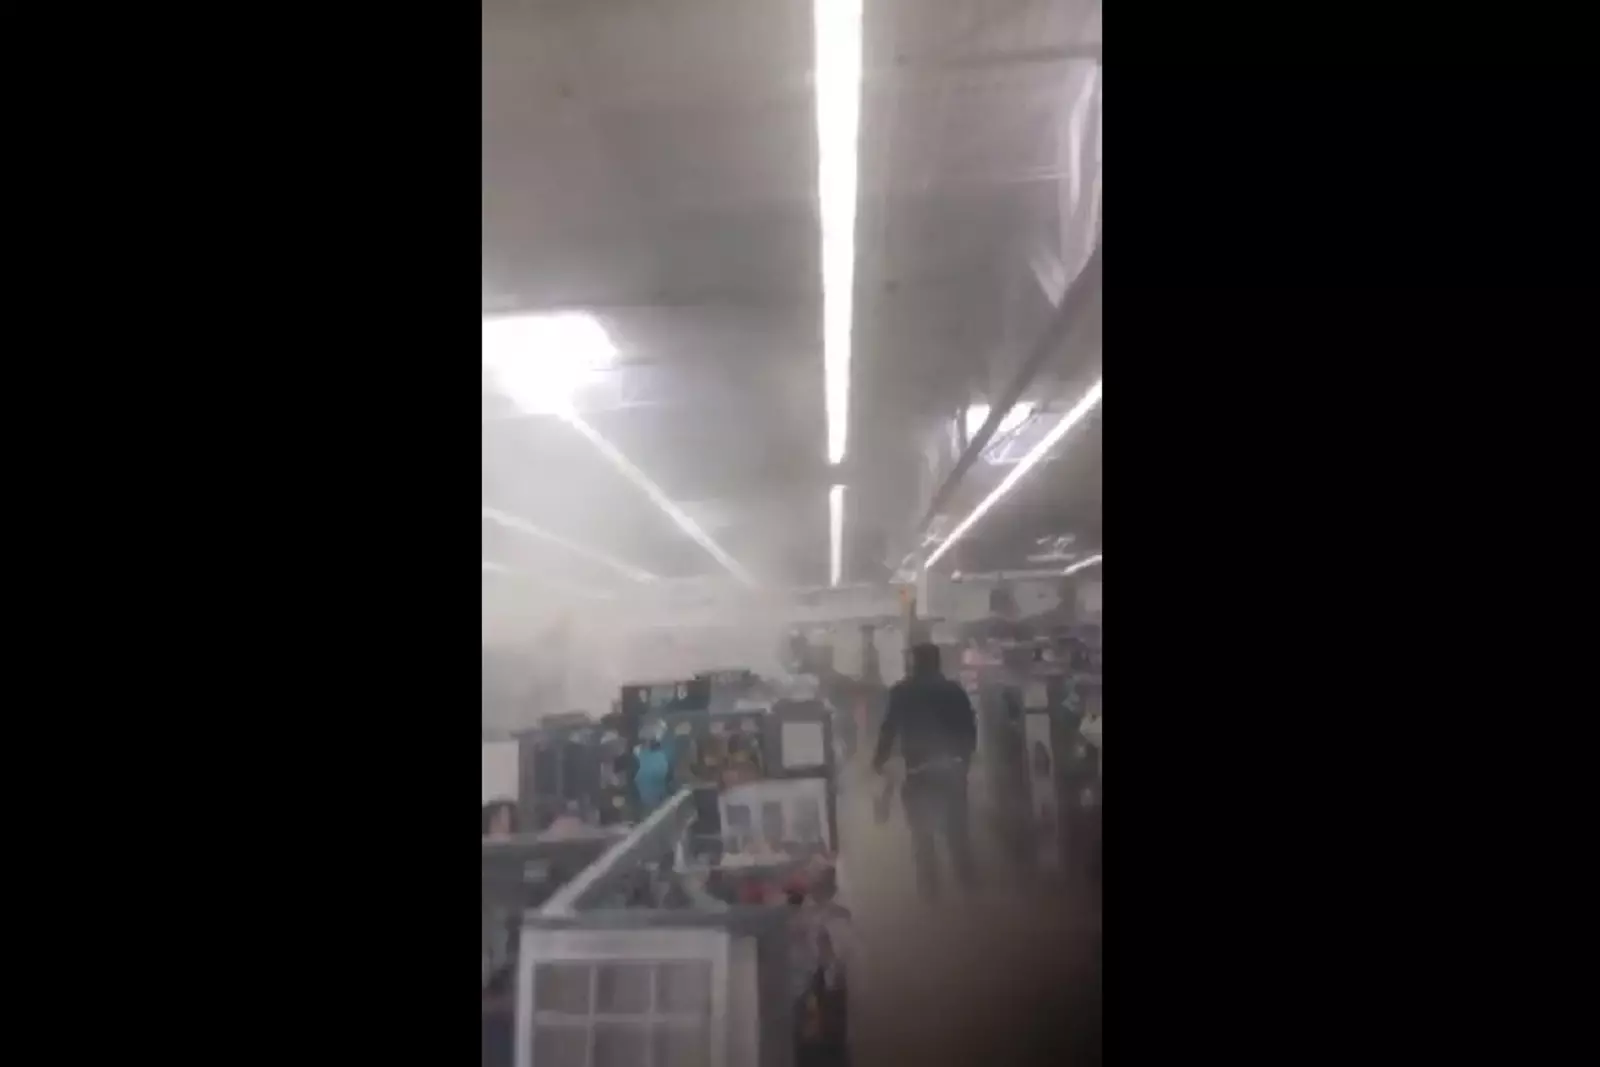 Philly Man Saves Cherry Hill Walmart From Lingerie Fire In Crazy Video